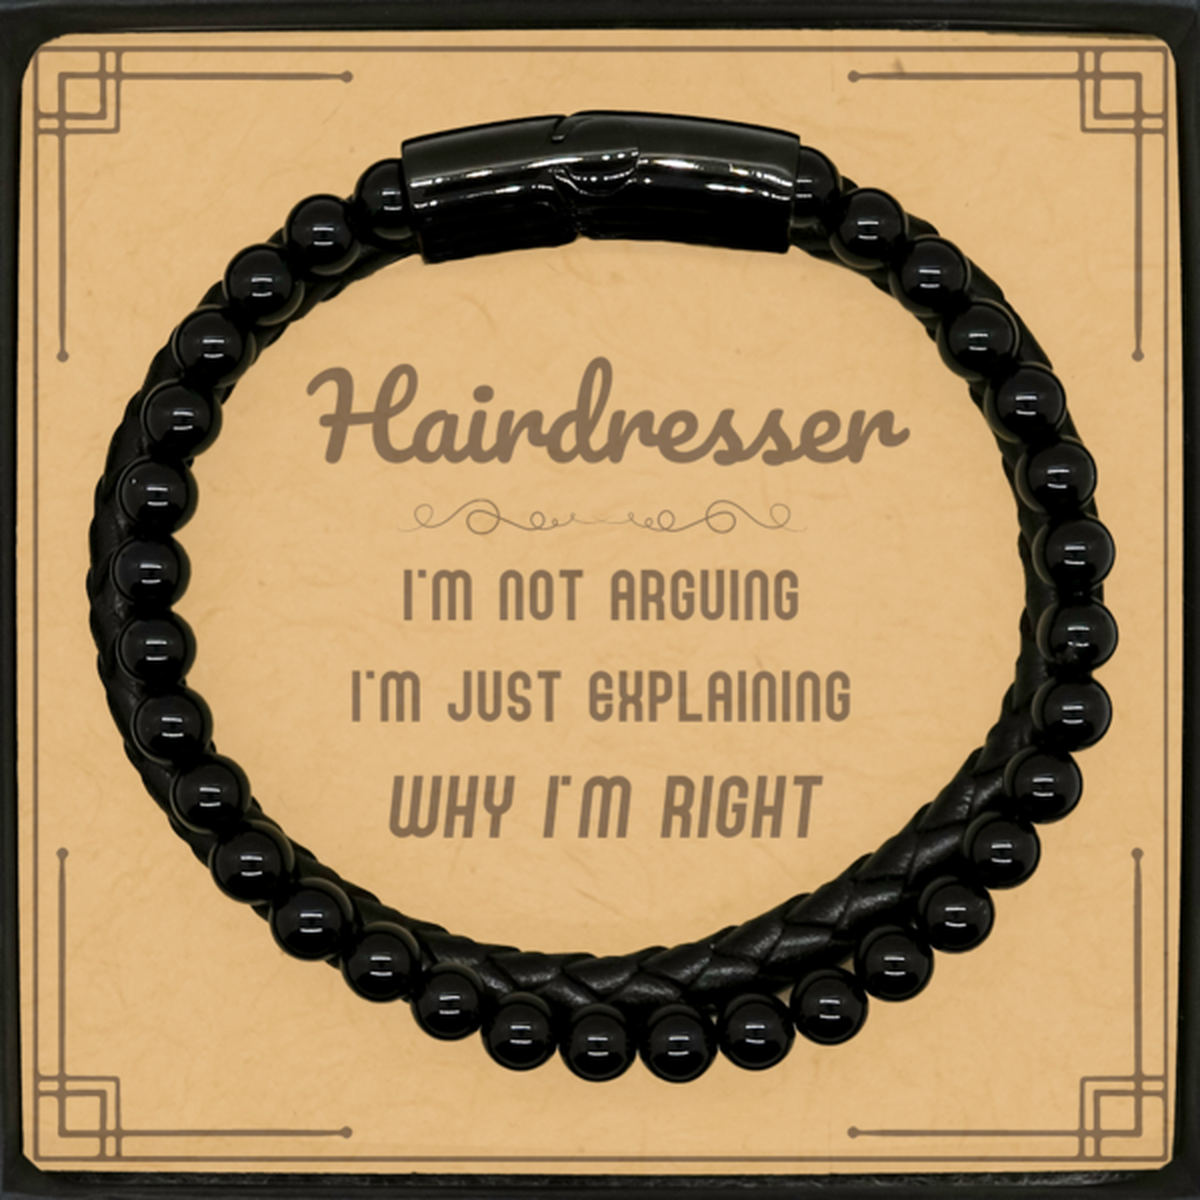 Hairdresser I'm not Arguing. I'm Just Explaining Why I'm RIGHT Stone Leather Bracelets, Funny Saying Quote Hairdresser Gifts For Hairdresser Message Card Graduation Birthday Christmas Gifts for Men Women Coworker